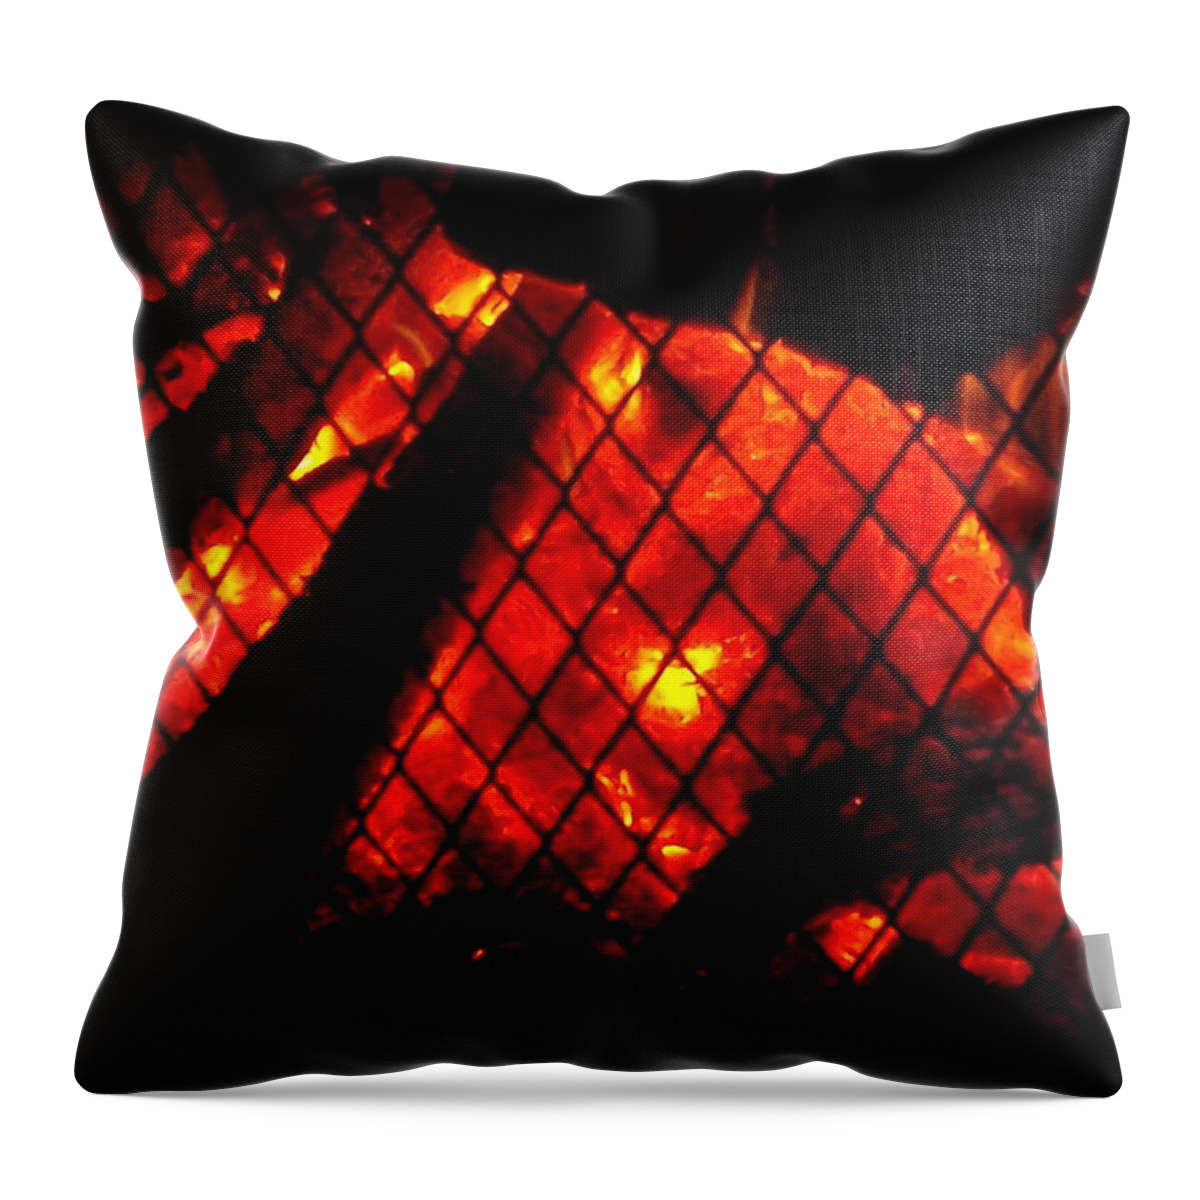 Yule Log Throw Pillow featuring the photograph Glowing Embers by Darren Robinson